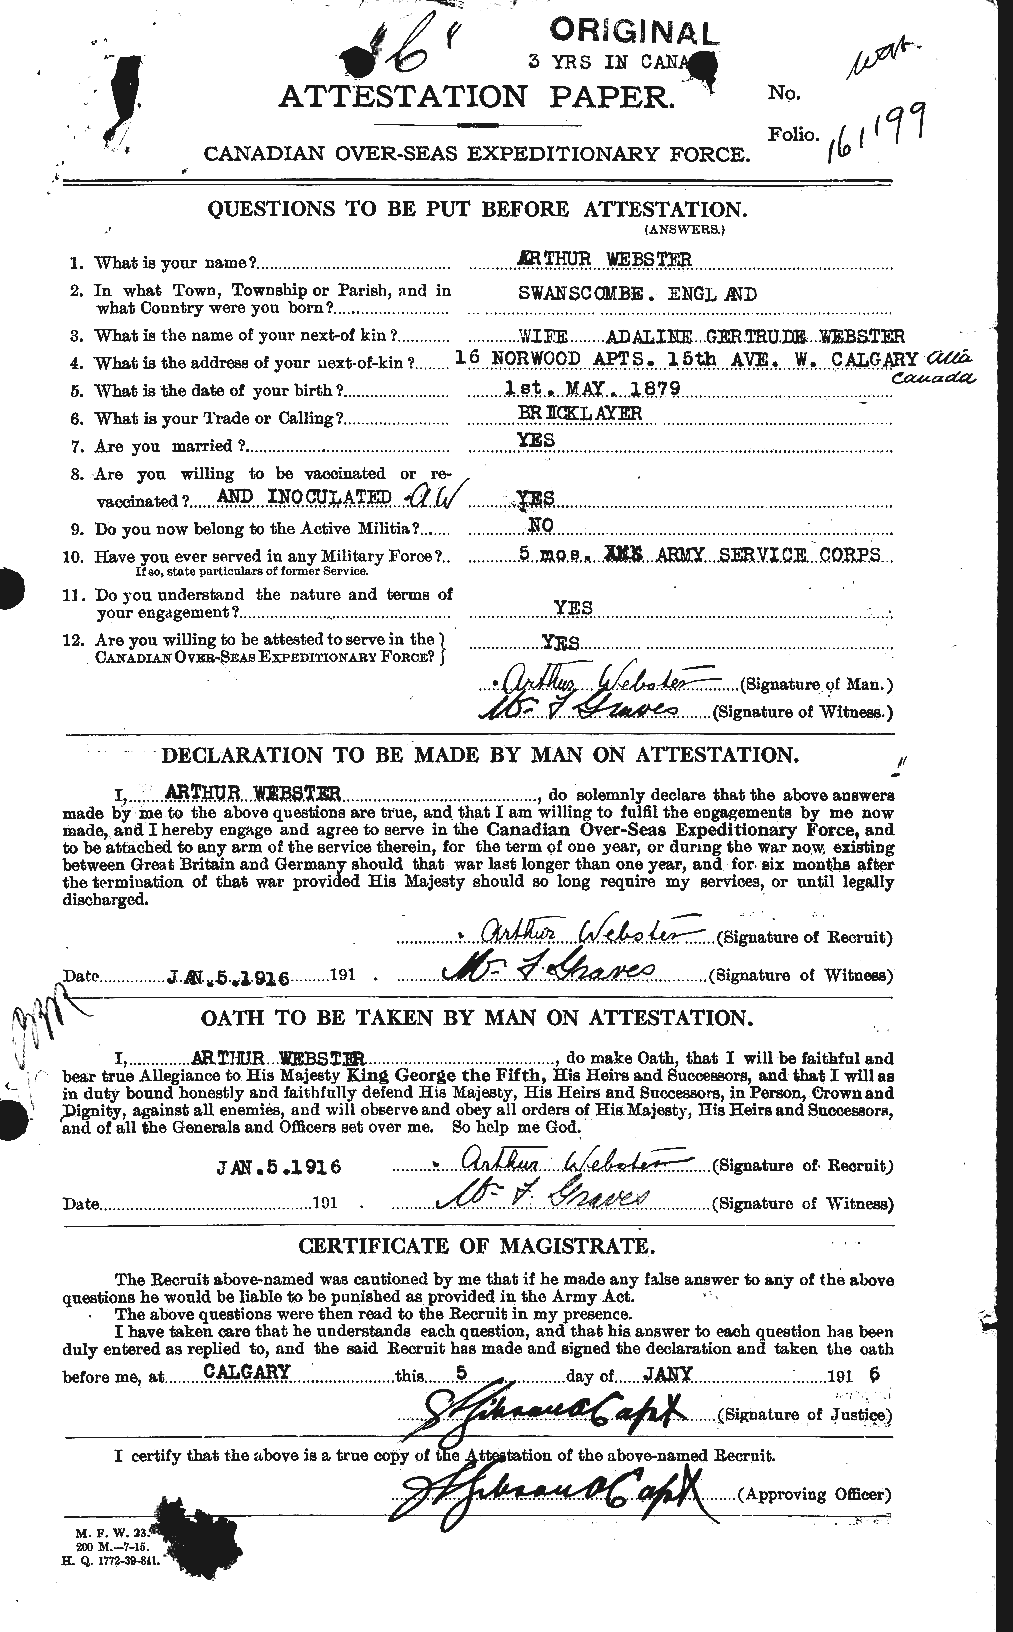 Personnel Records of the First World War - CEF 670254a